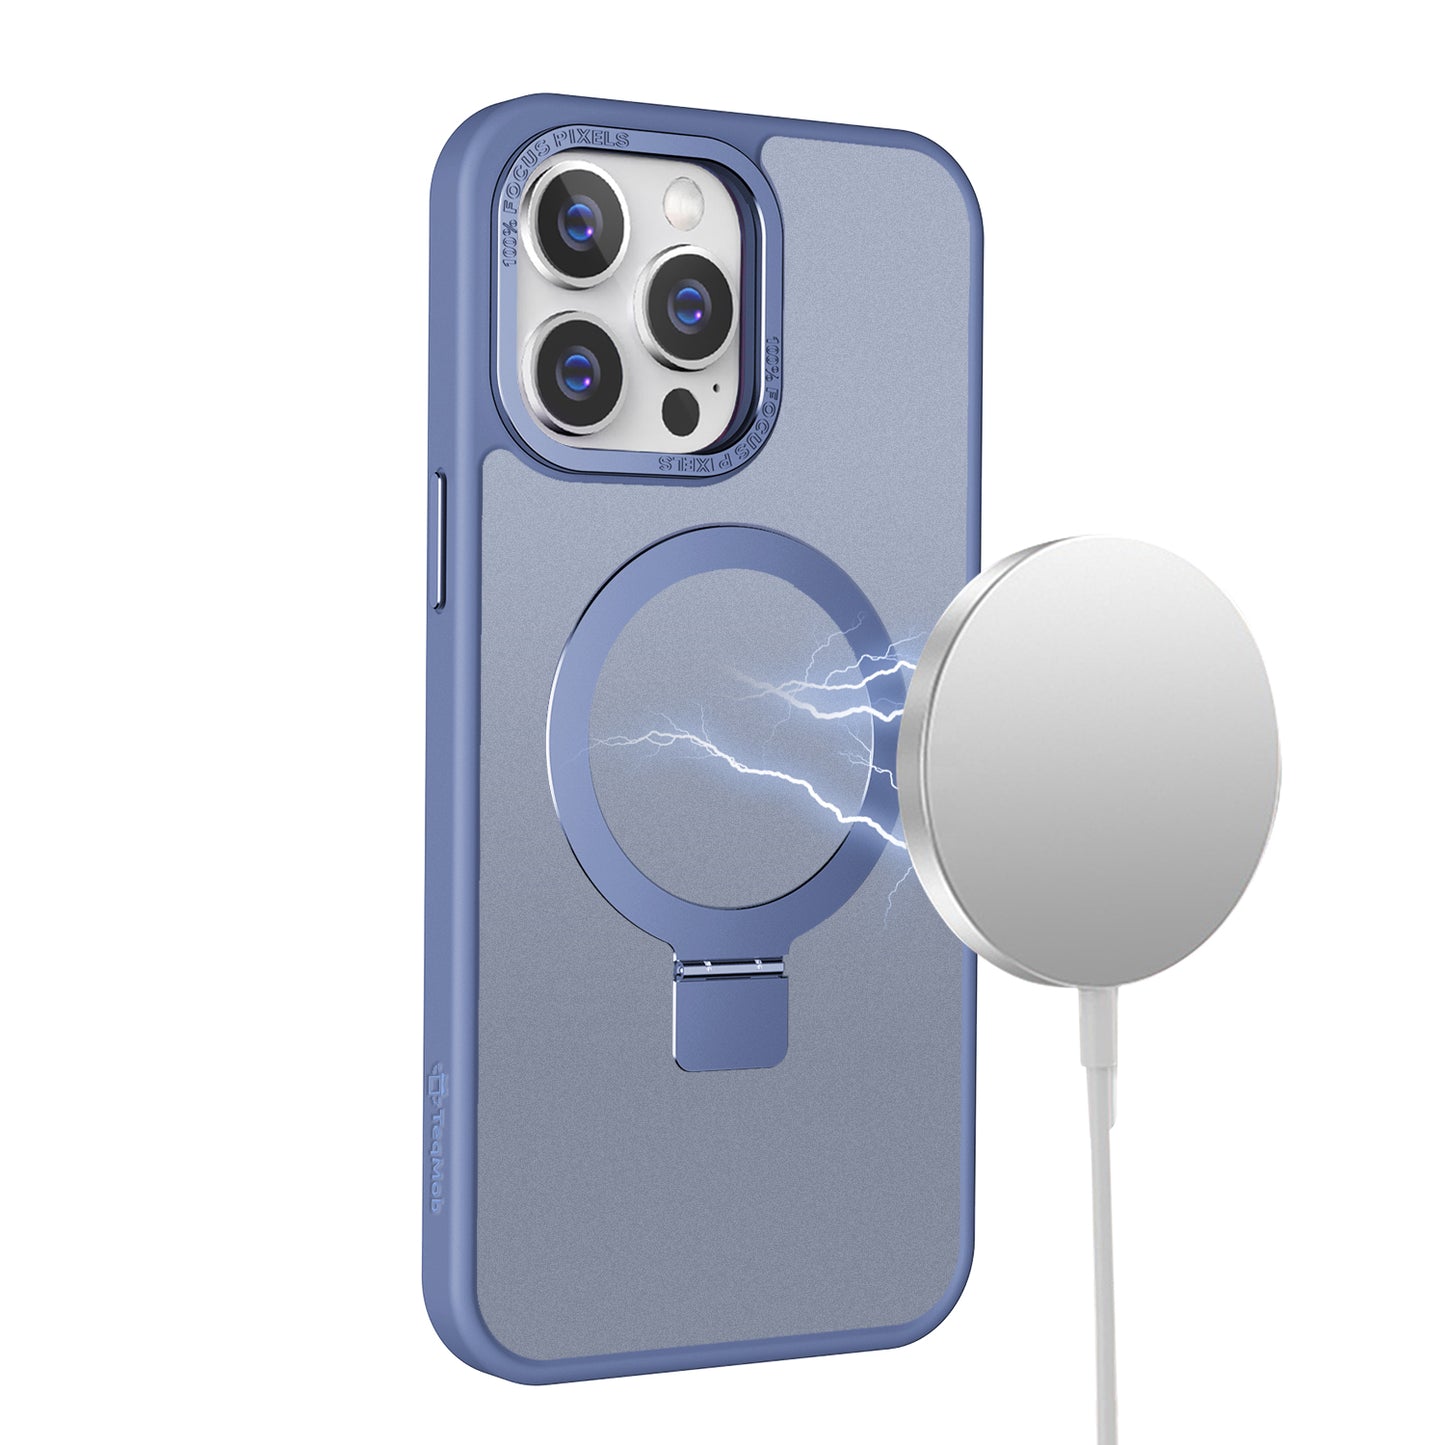 Blue Ringkick Frosted Case for iPhone 11